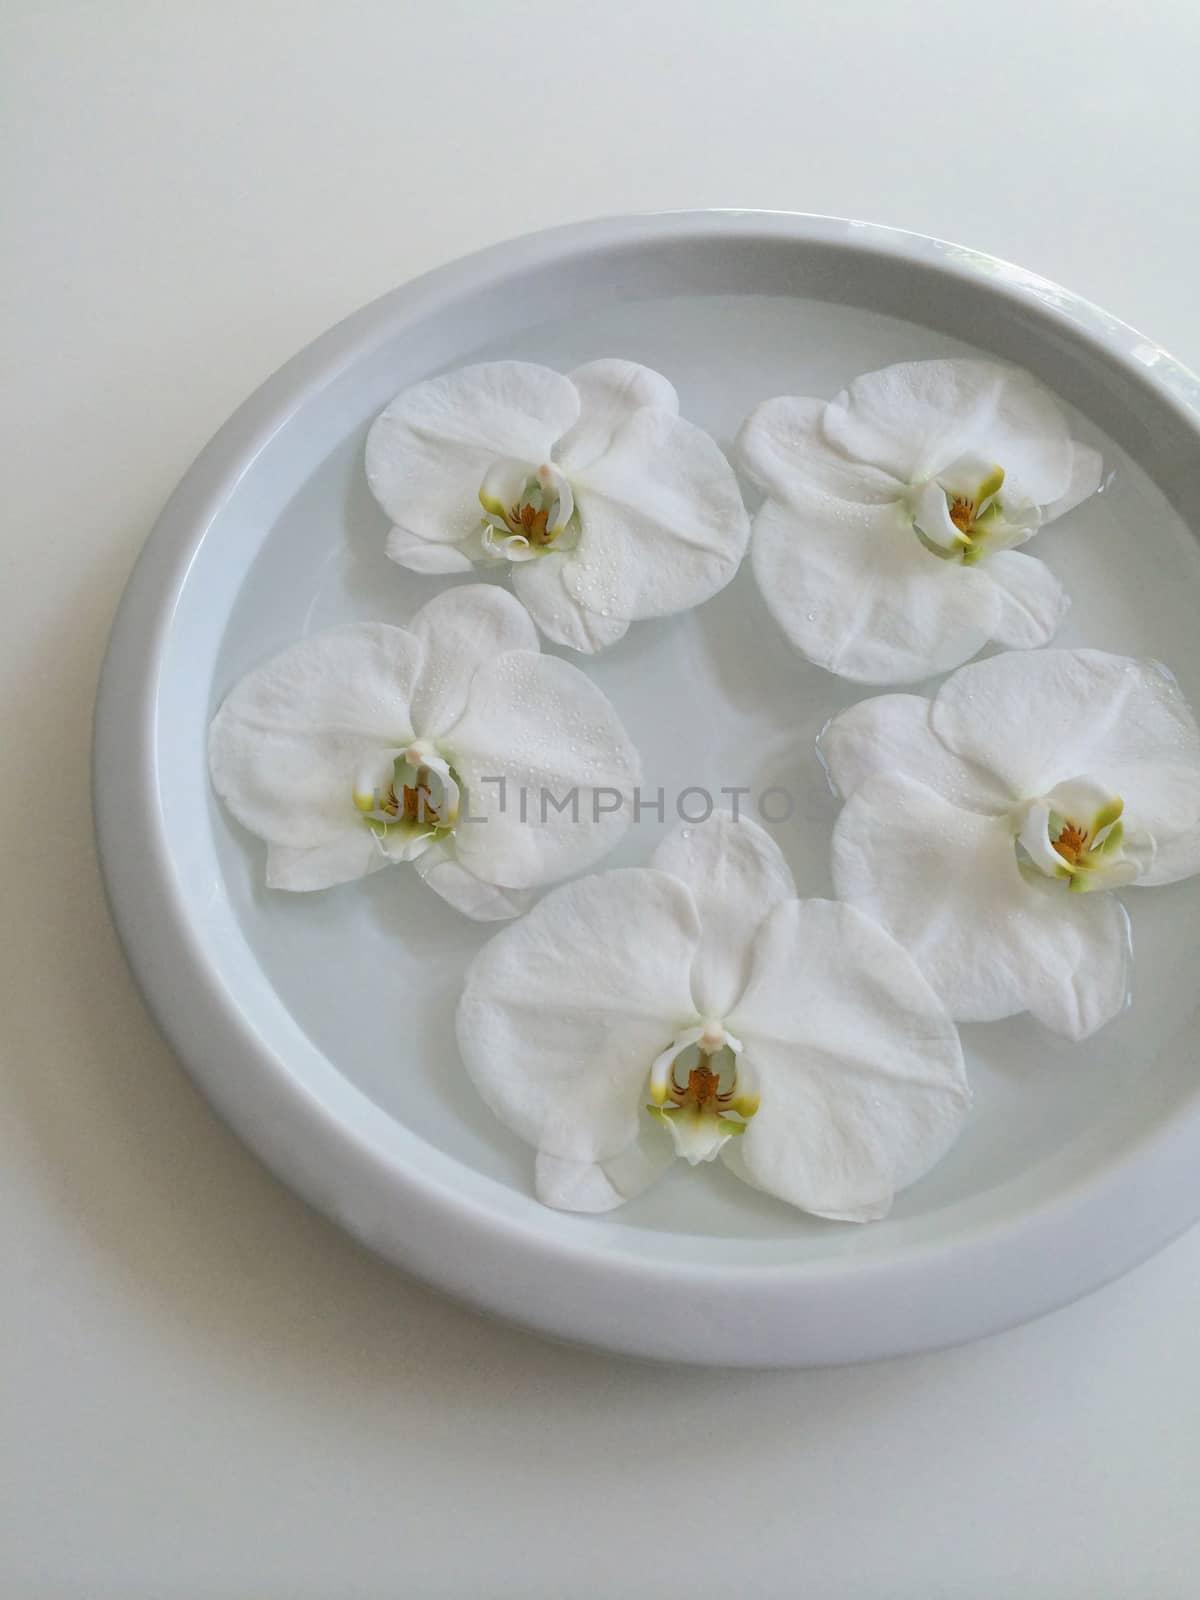 Five floating orchids in a bowl of water